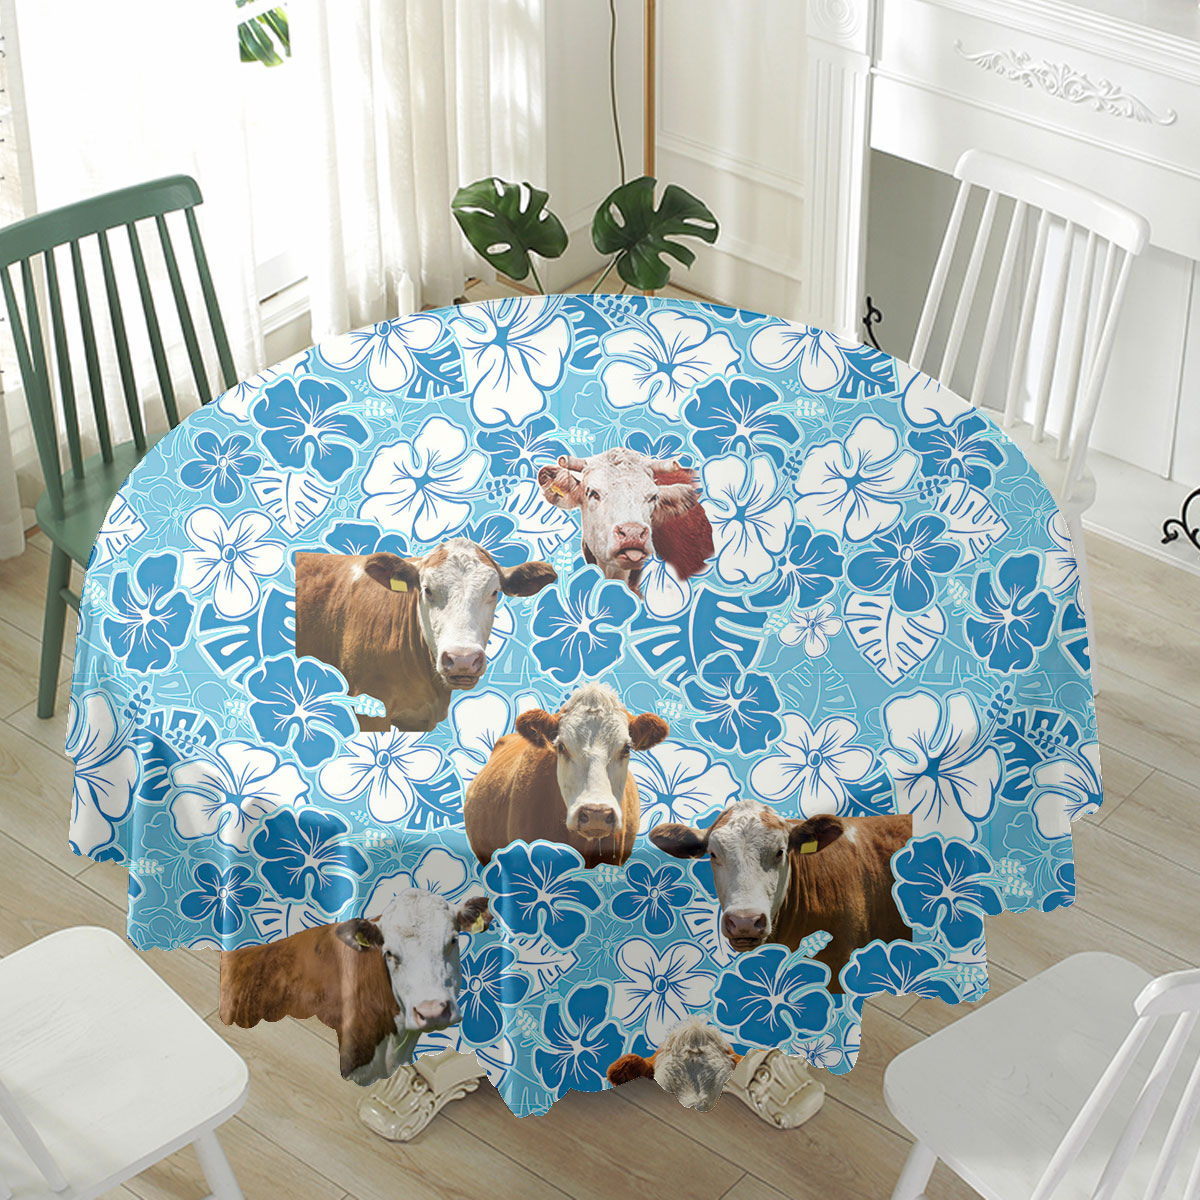 Hereford Blue Floral Waterproof Tablecloth